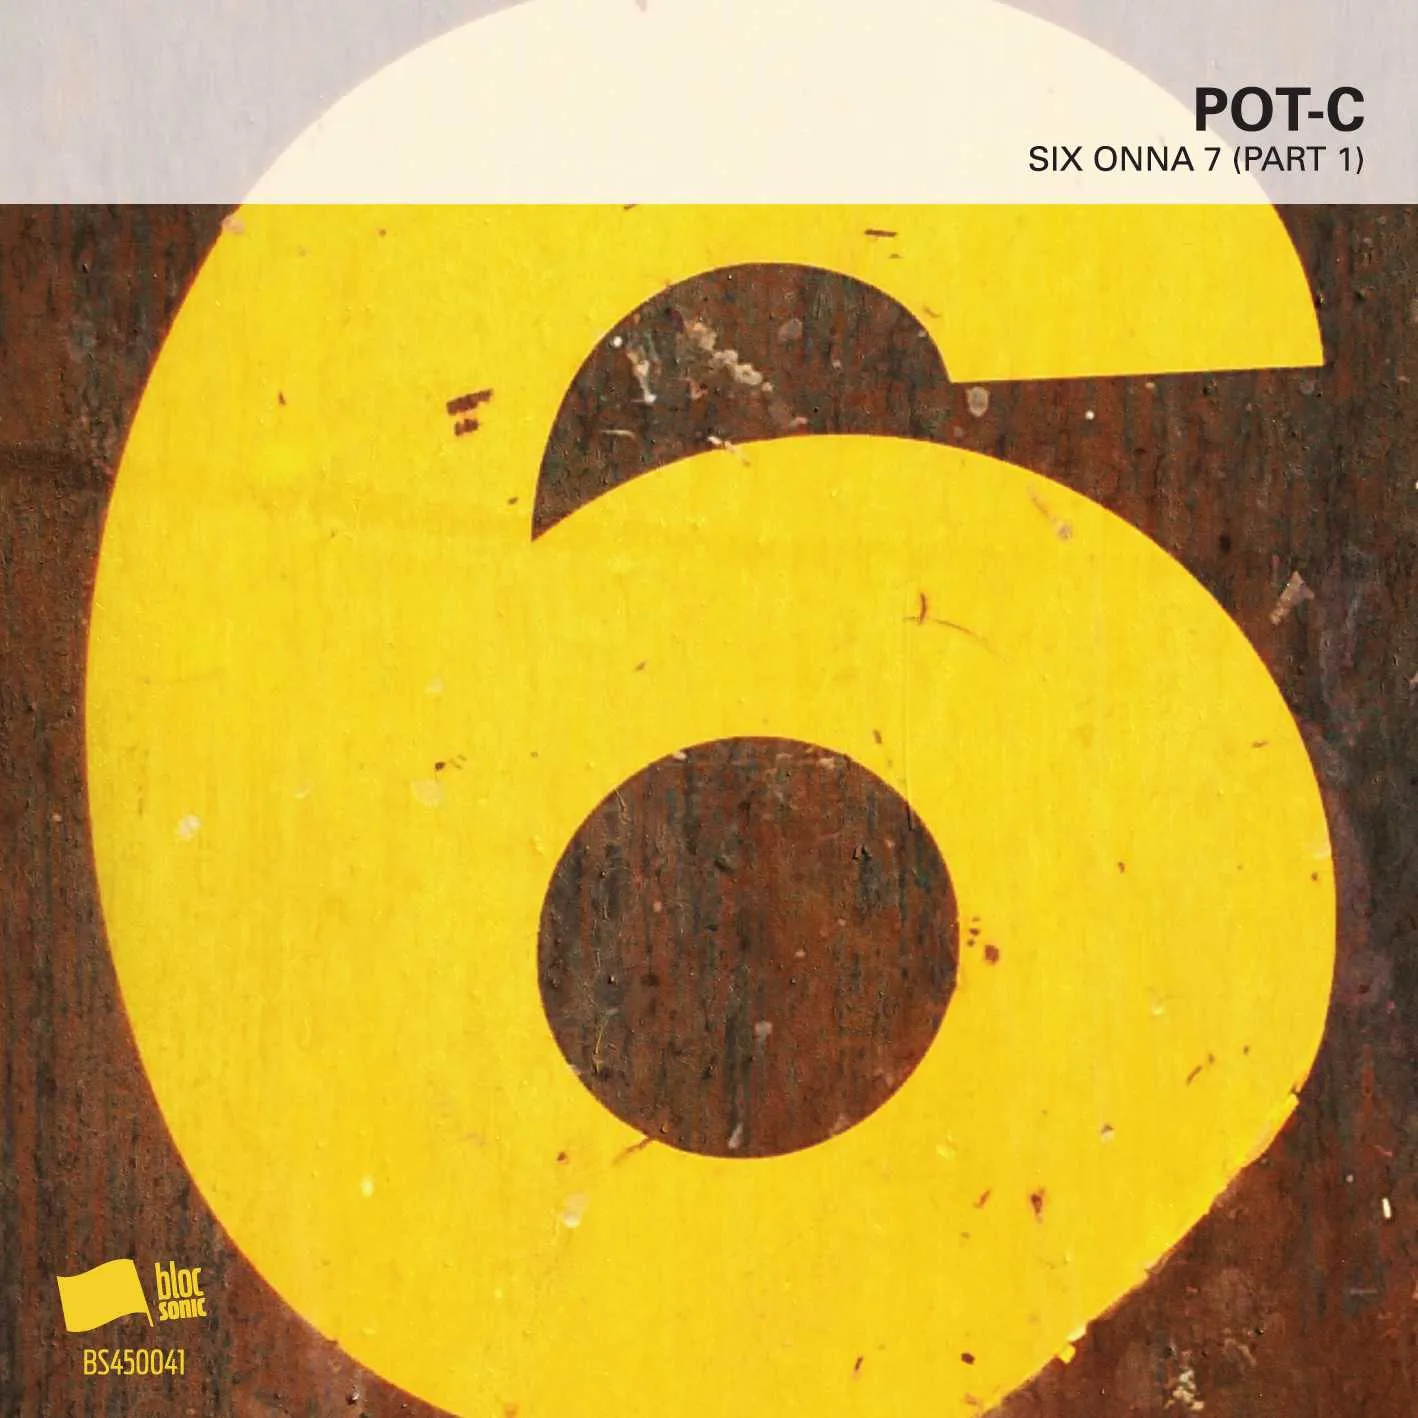 Album cover for “SIX ONNA 7 (Part 1)” by Pot-C